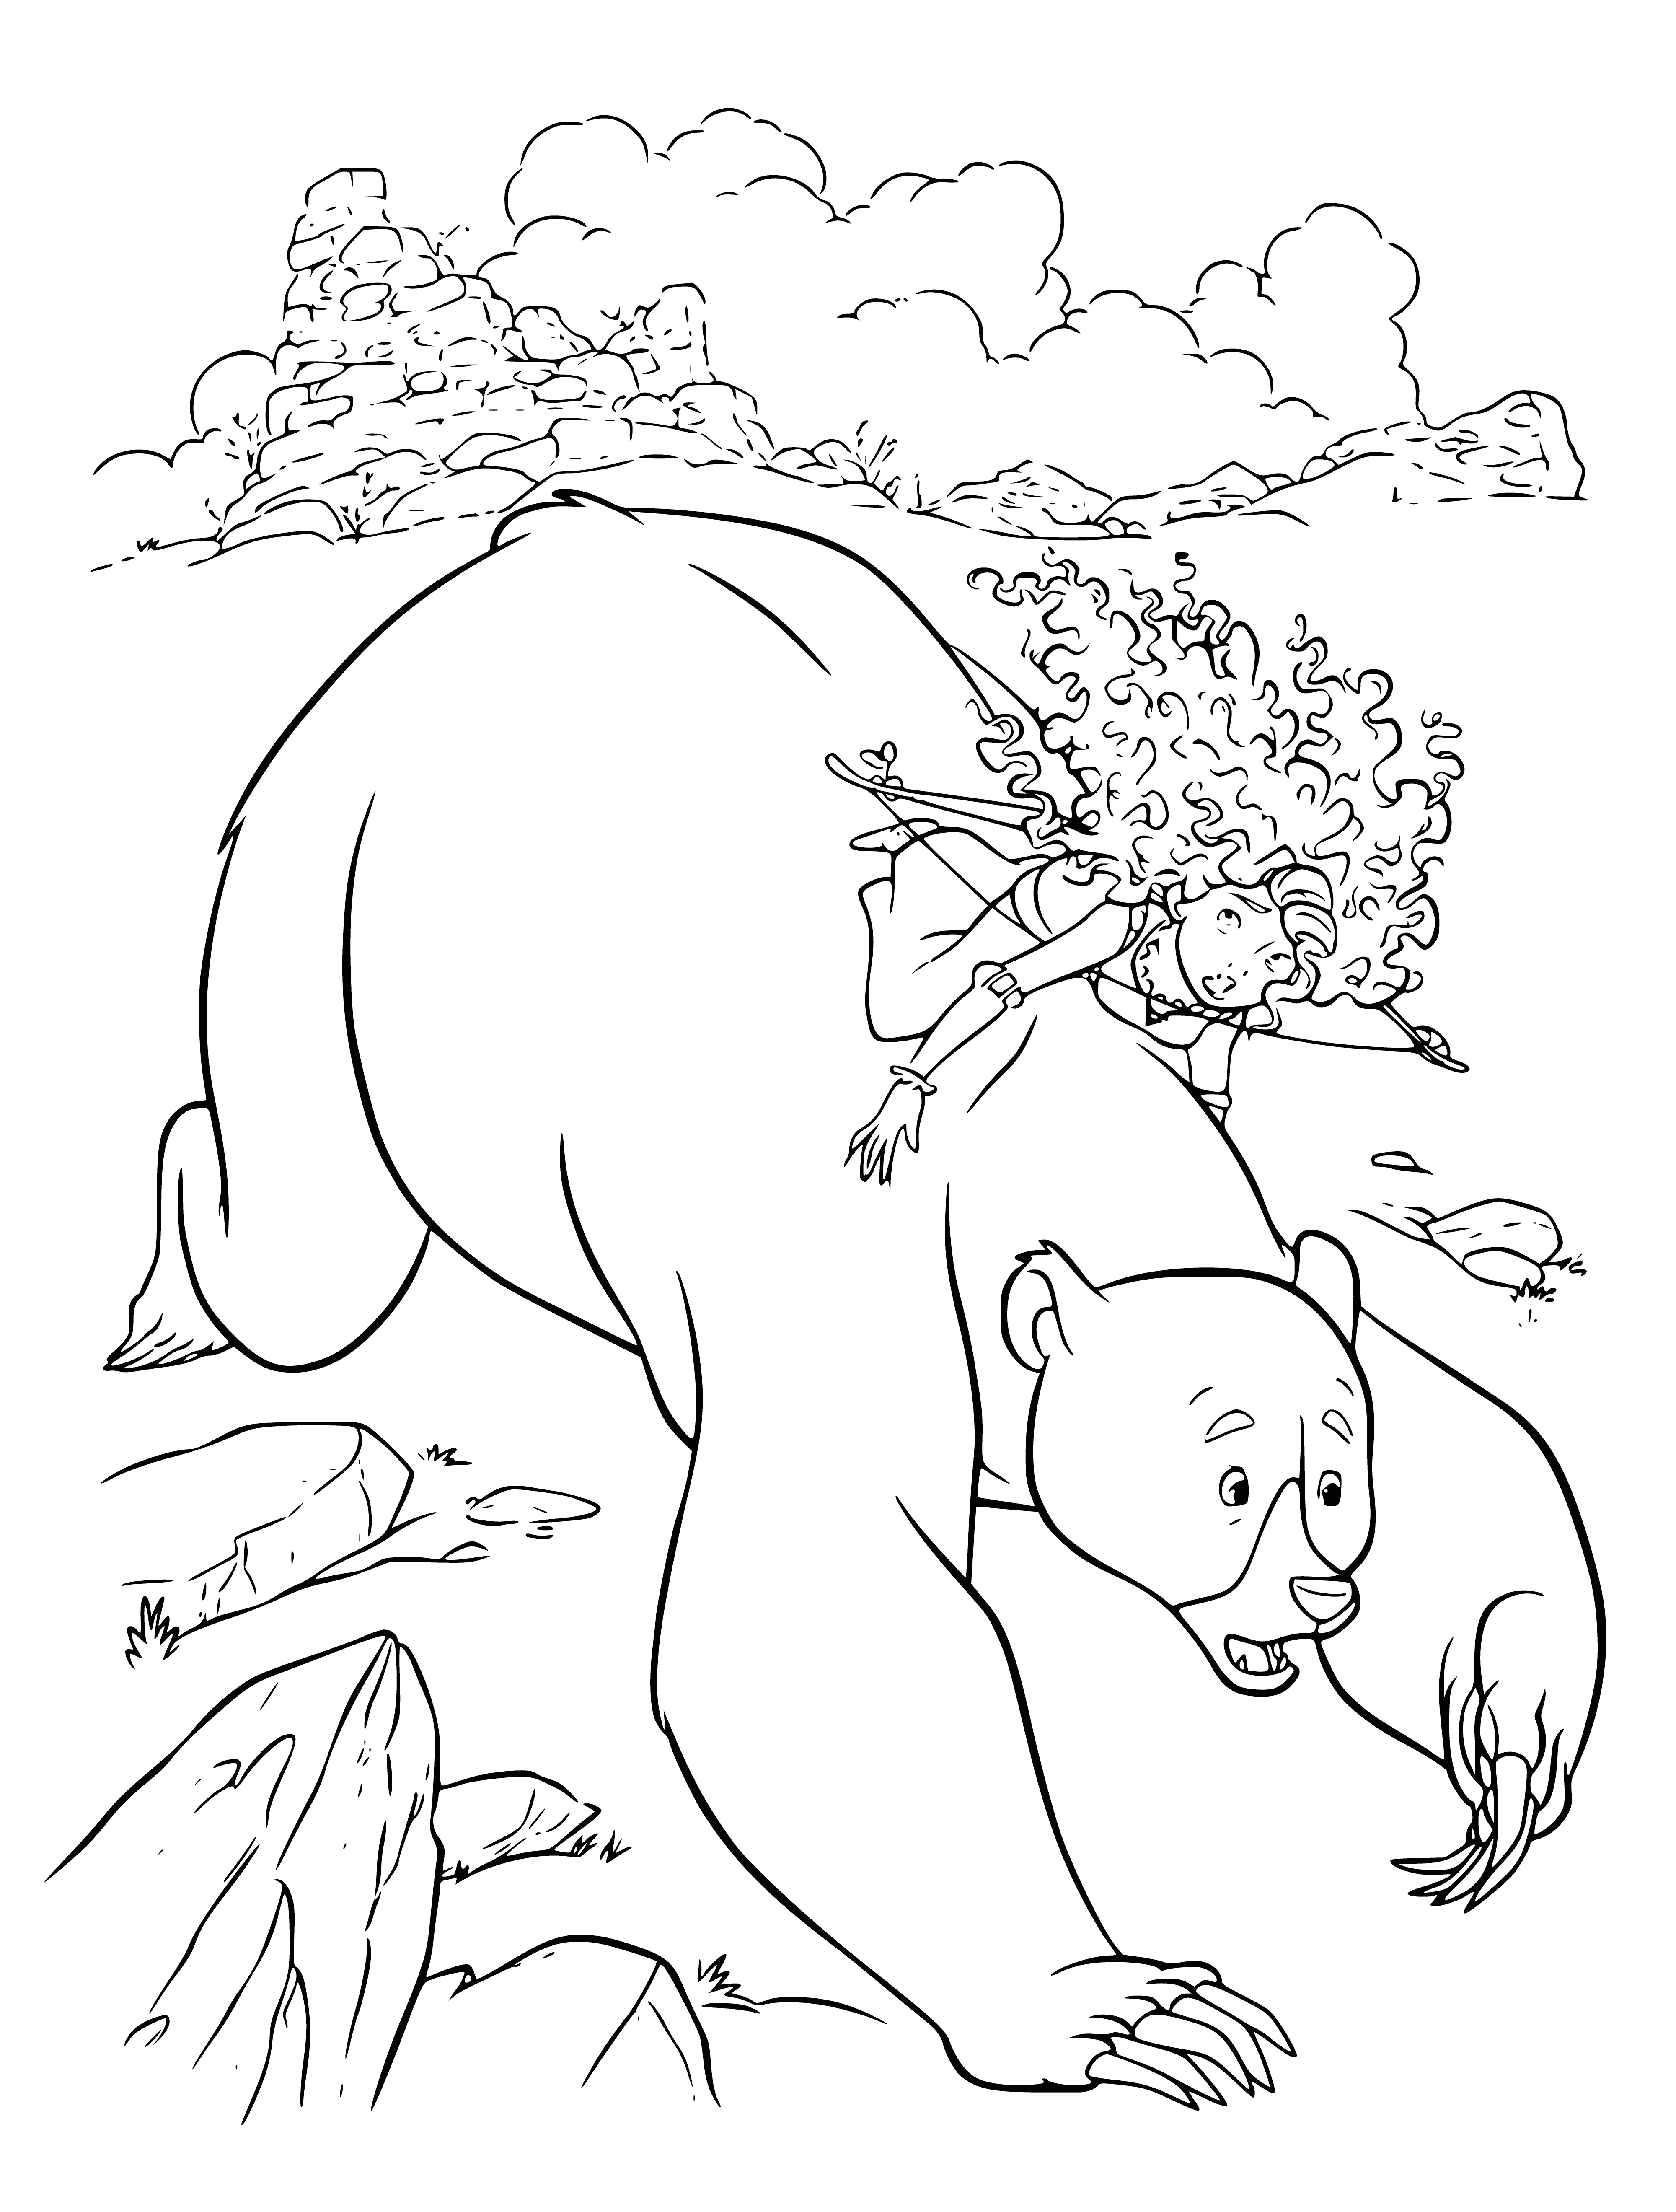 coloring page: Rick stands before a fierce creature with light brown fur, many teeth, a long tail and standing tall. Elinor & Merida watch, fearful.